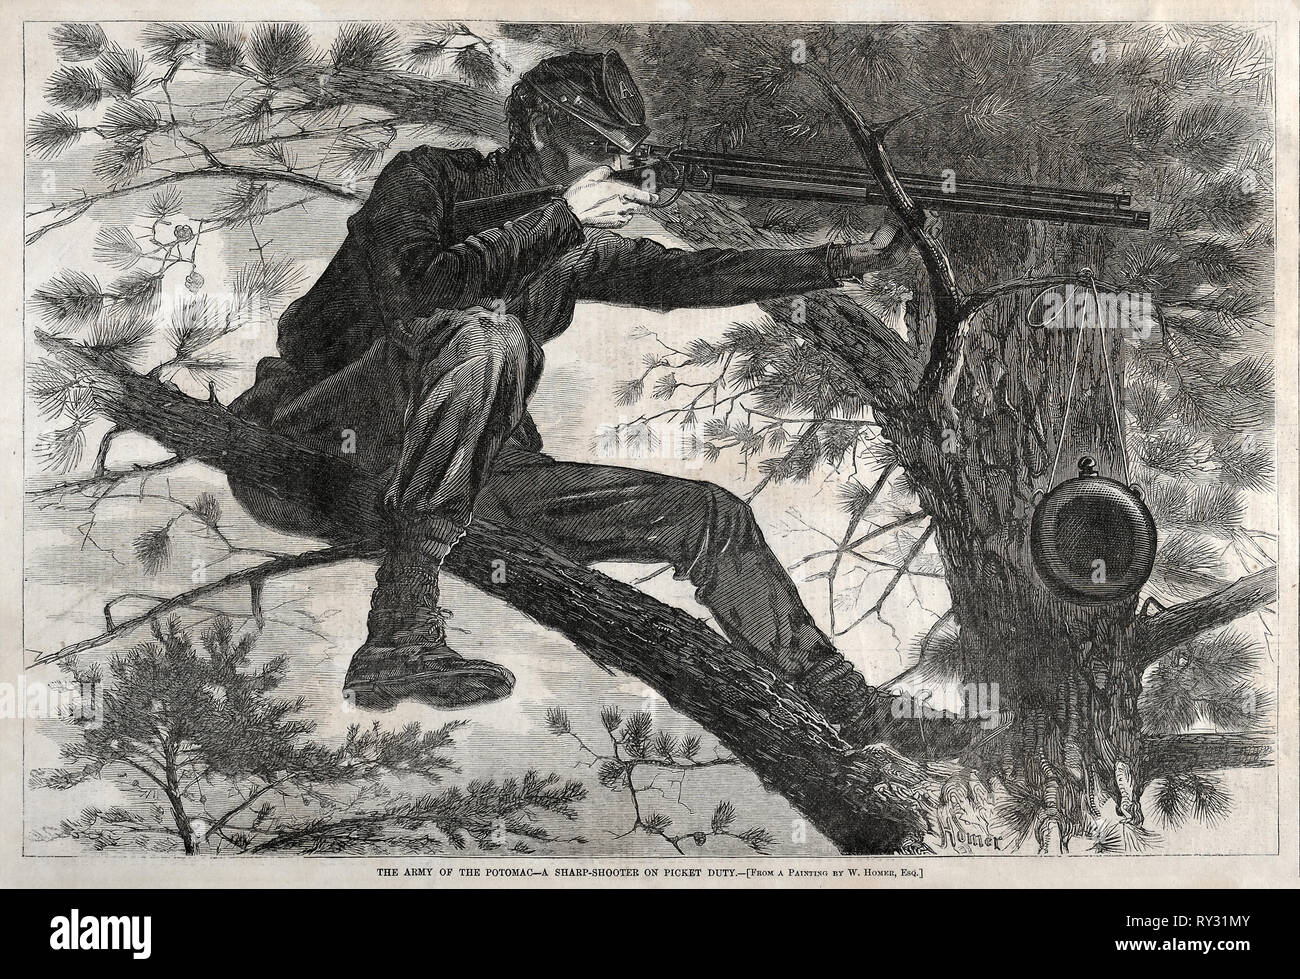 The Army of the Potomac - A Sharpshooter on Picket Duty, 1862. Winslow Homer (American, 1836-1910). Wood engraving Stock Photo